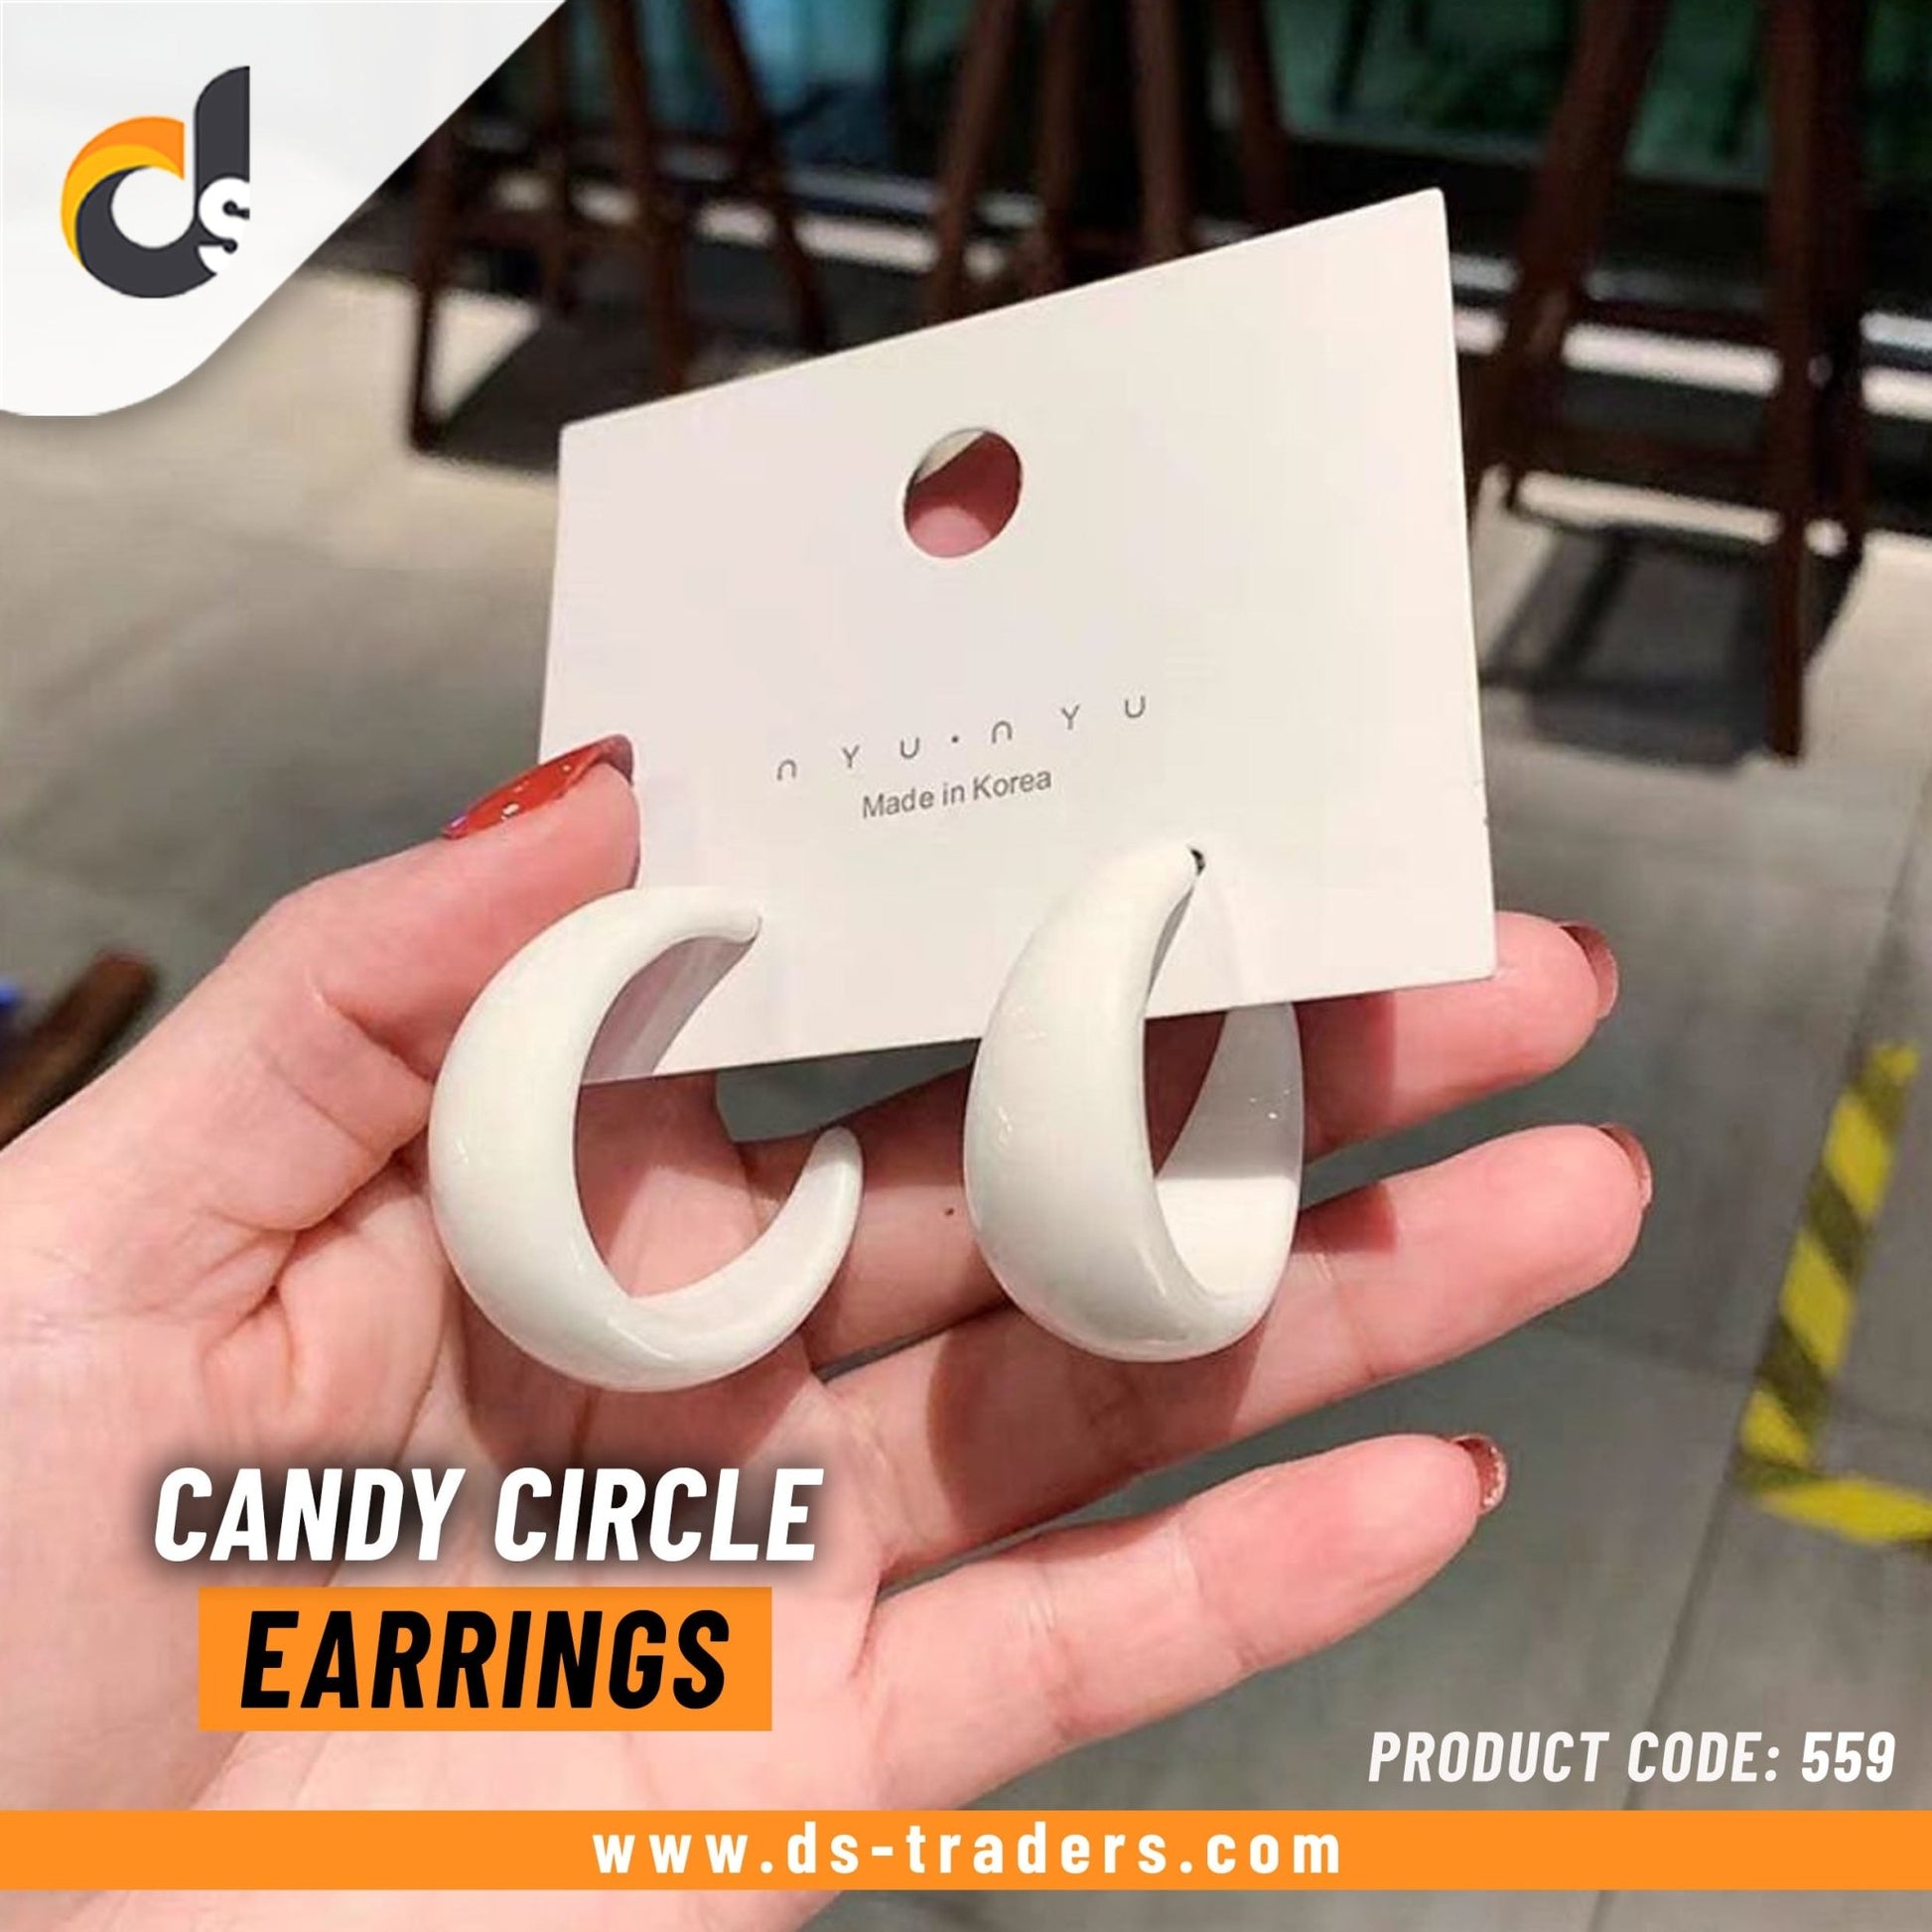 Candy Circle Earrings - DS Traders